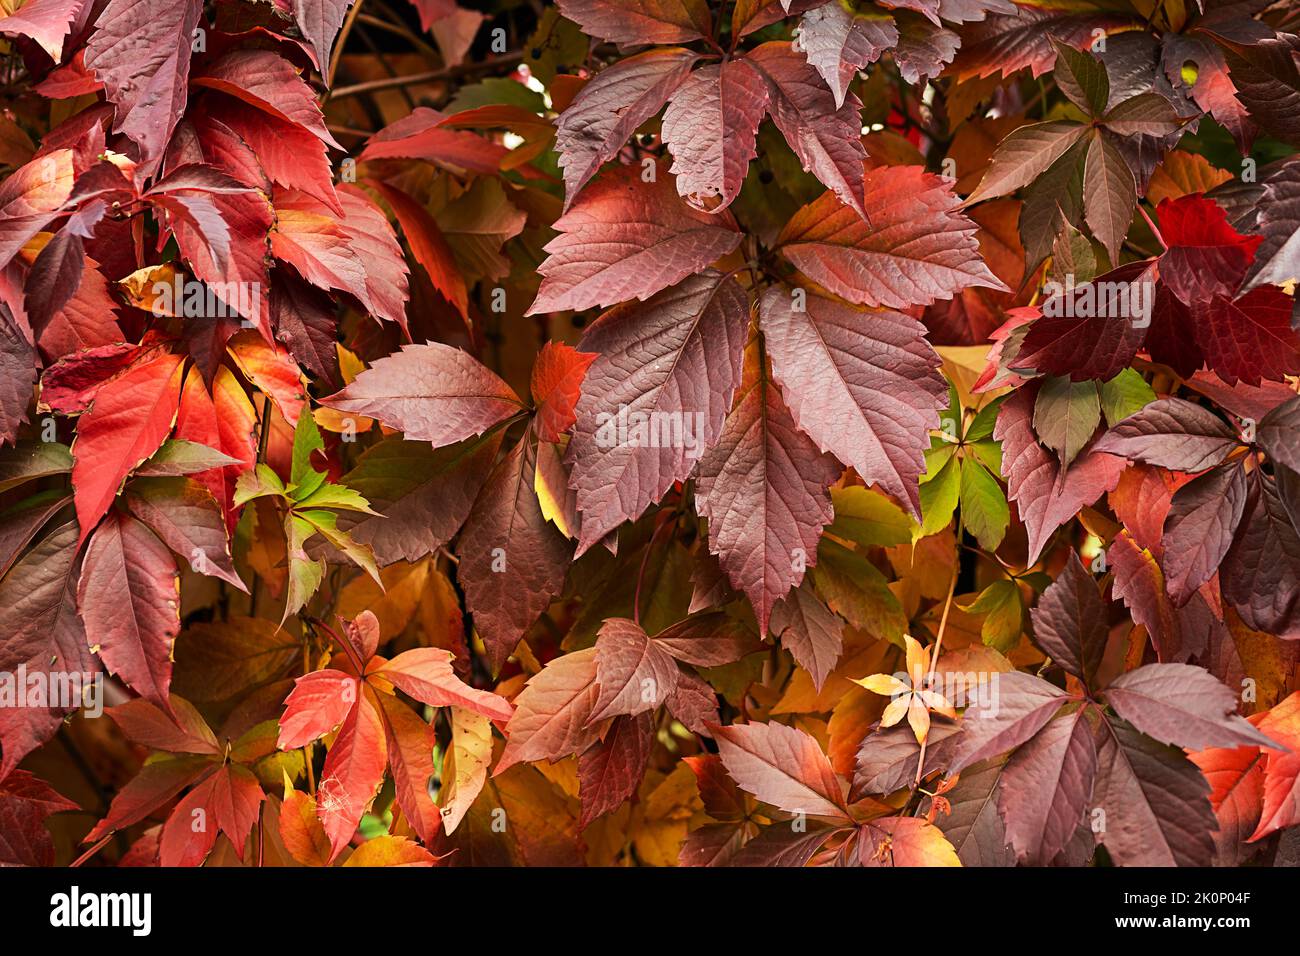 Colourful fall leaves growing on a wall. Leaves In Autumn Stock Photo